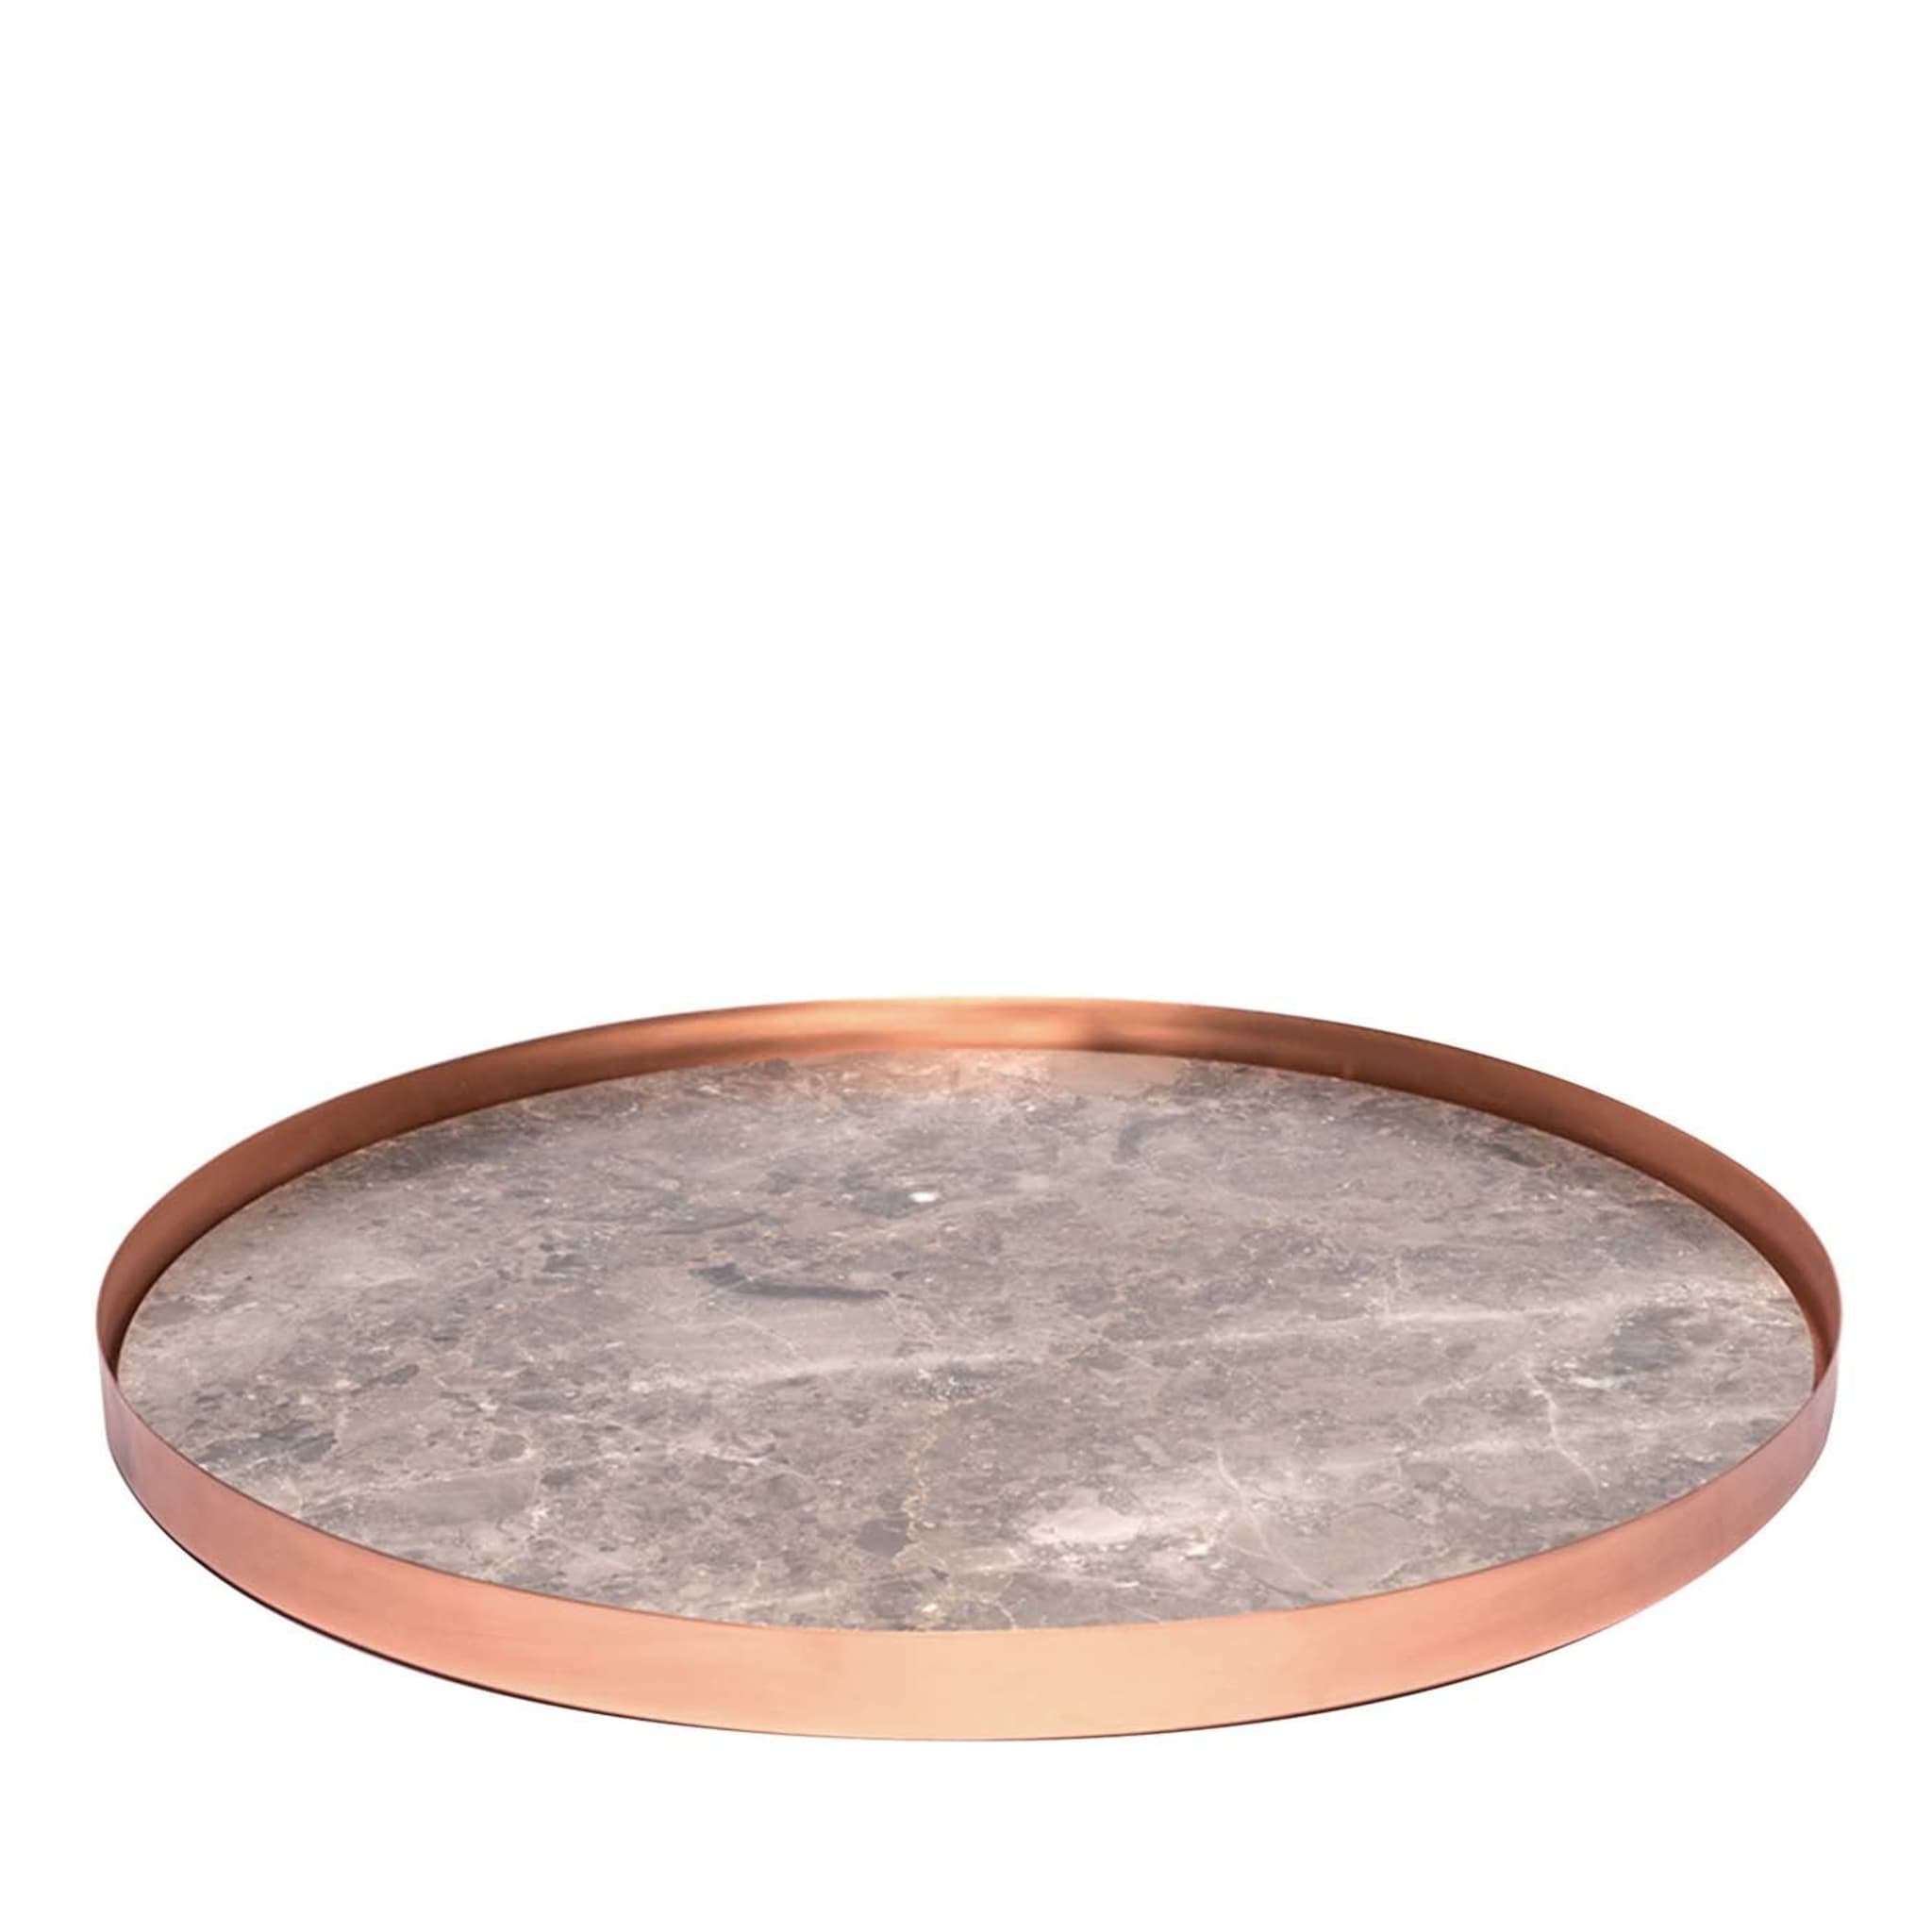 Full Moon Large Tray with Marble Base by Elisa Ossino - Main view